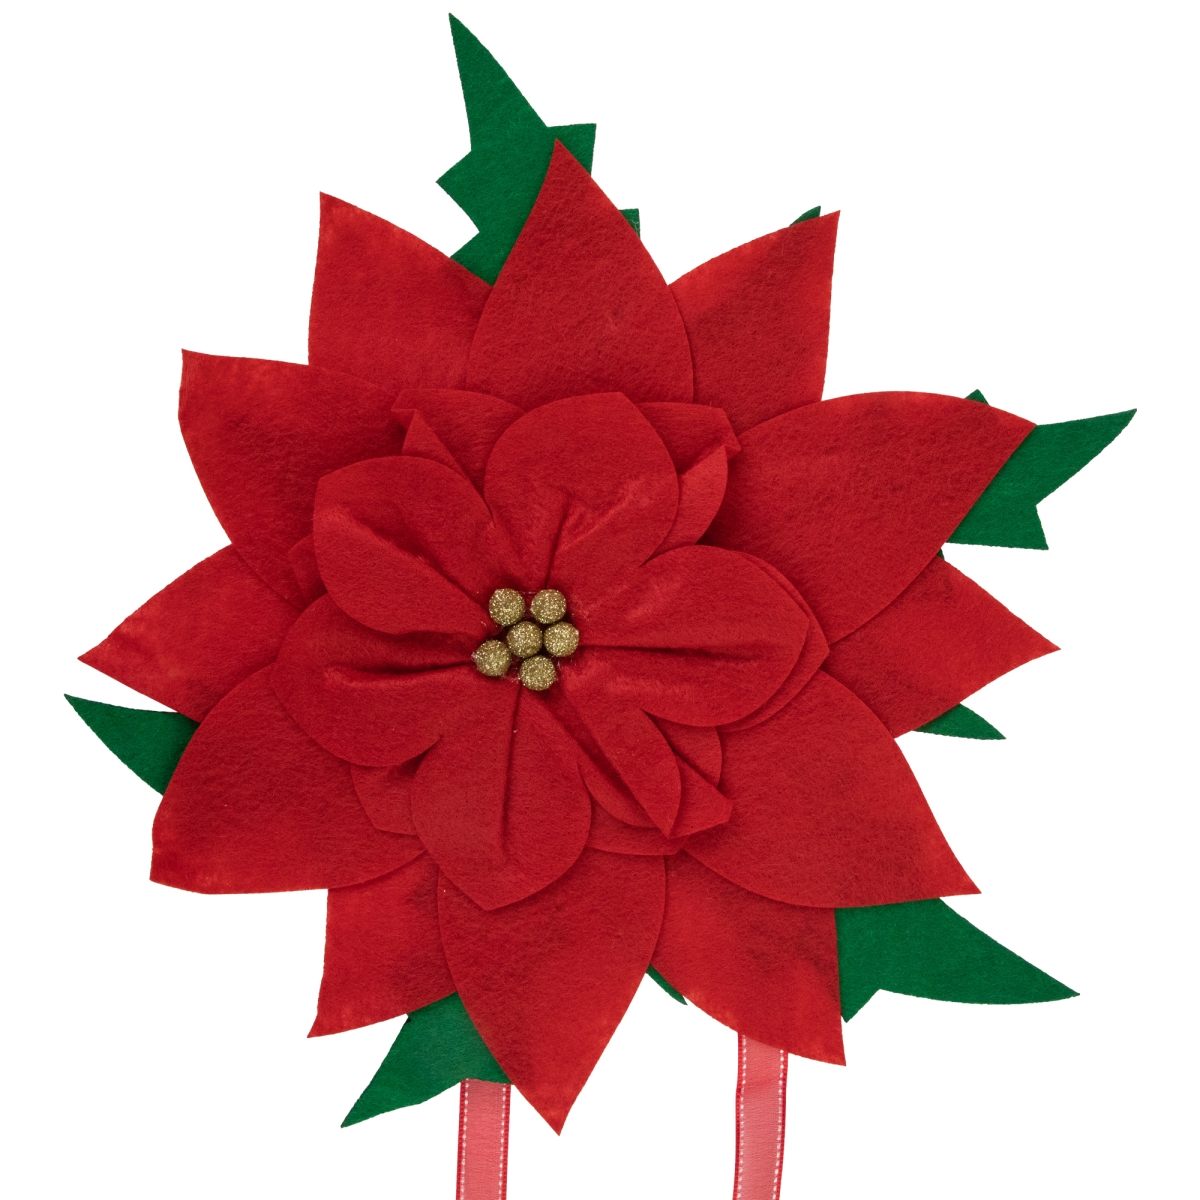 Picture of Northlight 35691732 29 in. Poinsettia Tie-On Christmas Tree Topper, Red - Unlit